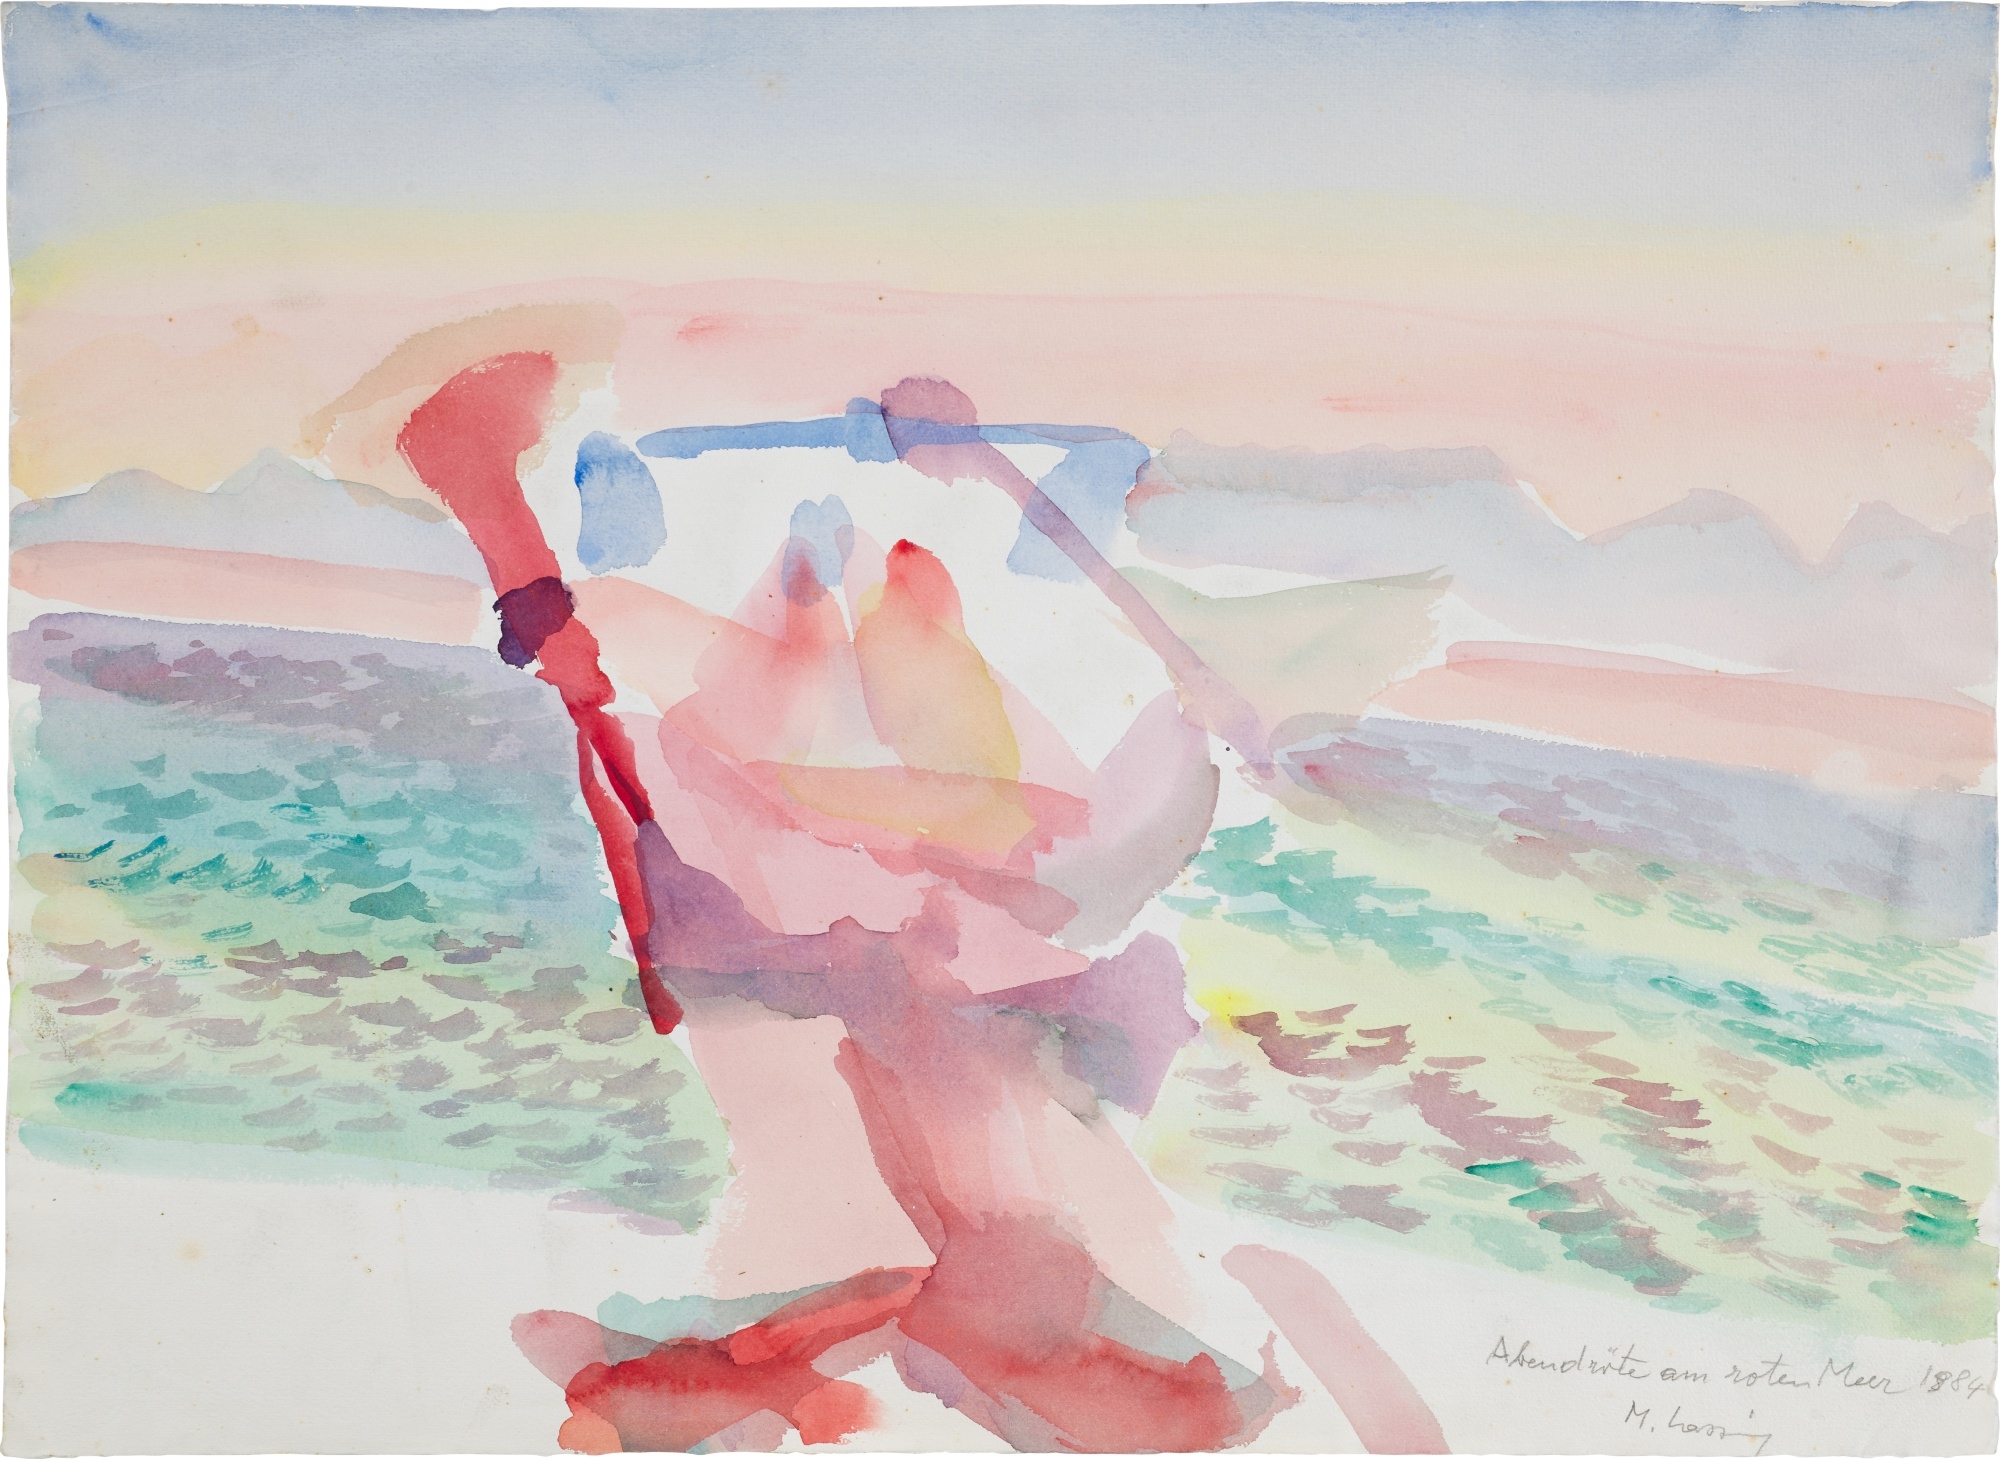 Abendröte am roten Meer by Maria Lassnig, Executed in 1984.